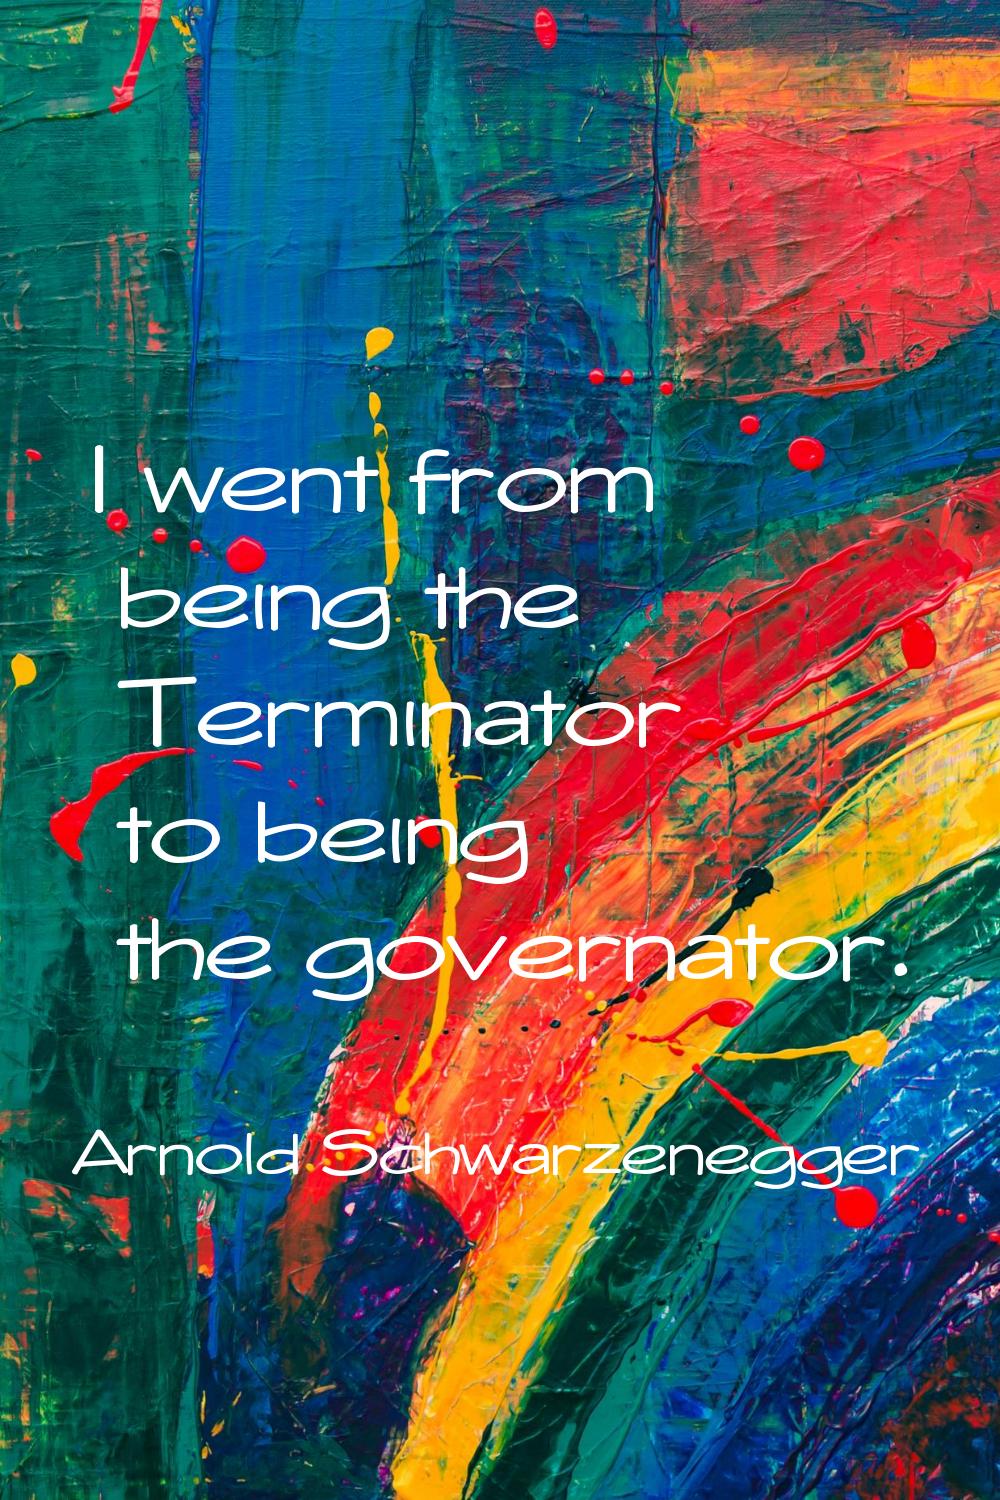 I went from being the Terminator to being the governator.